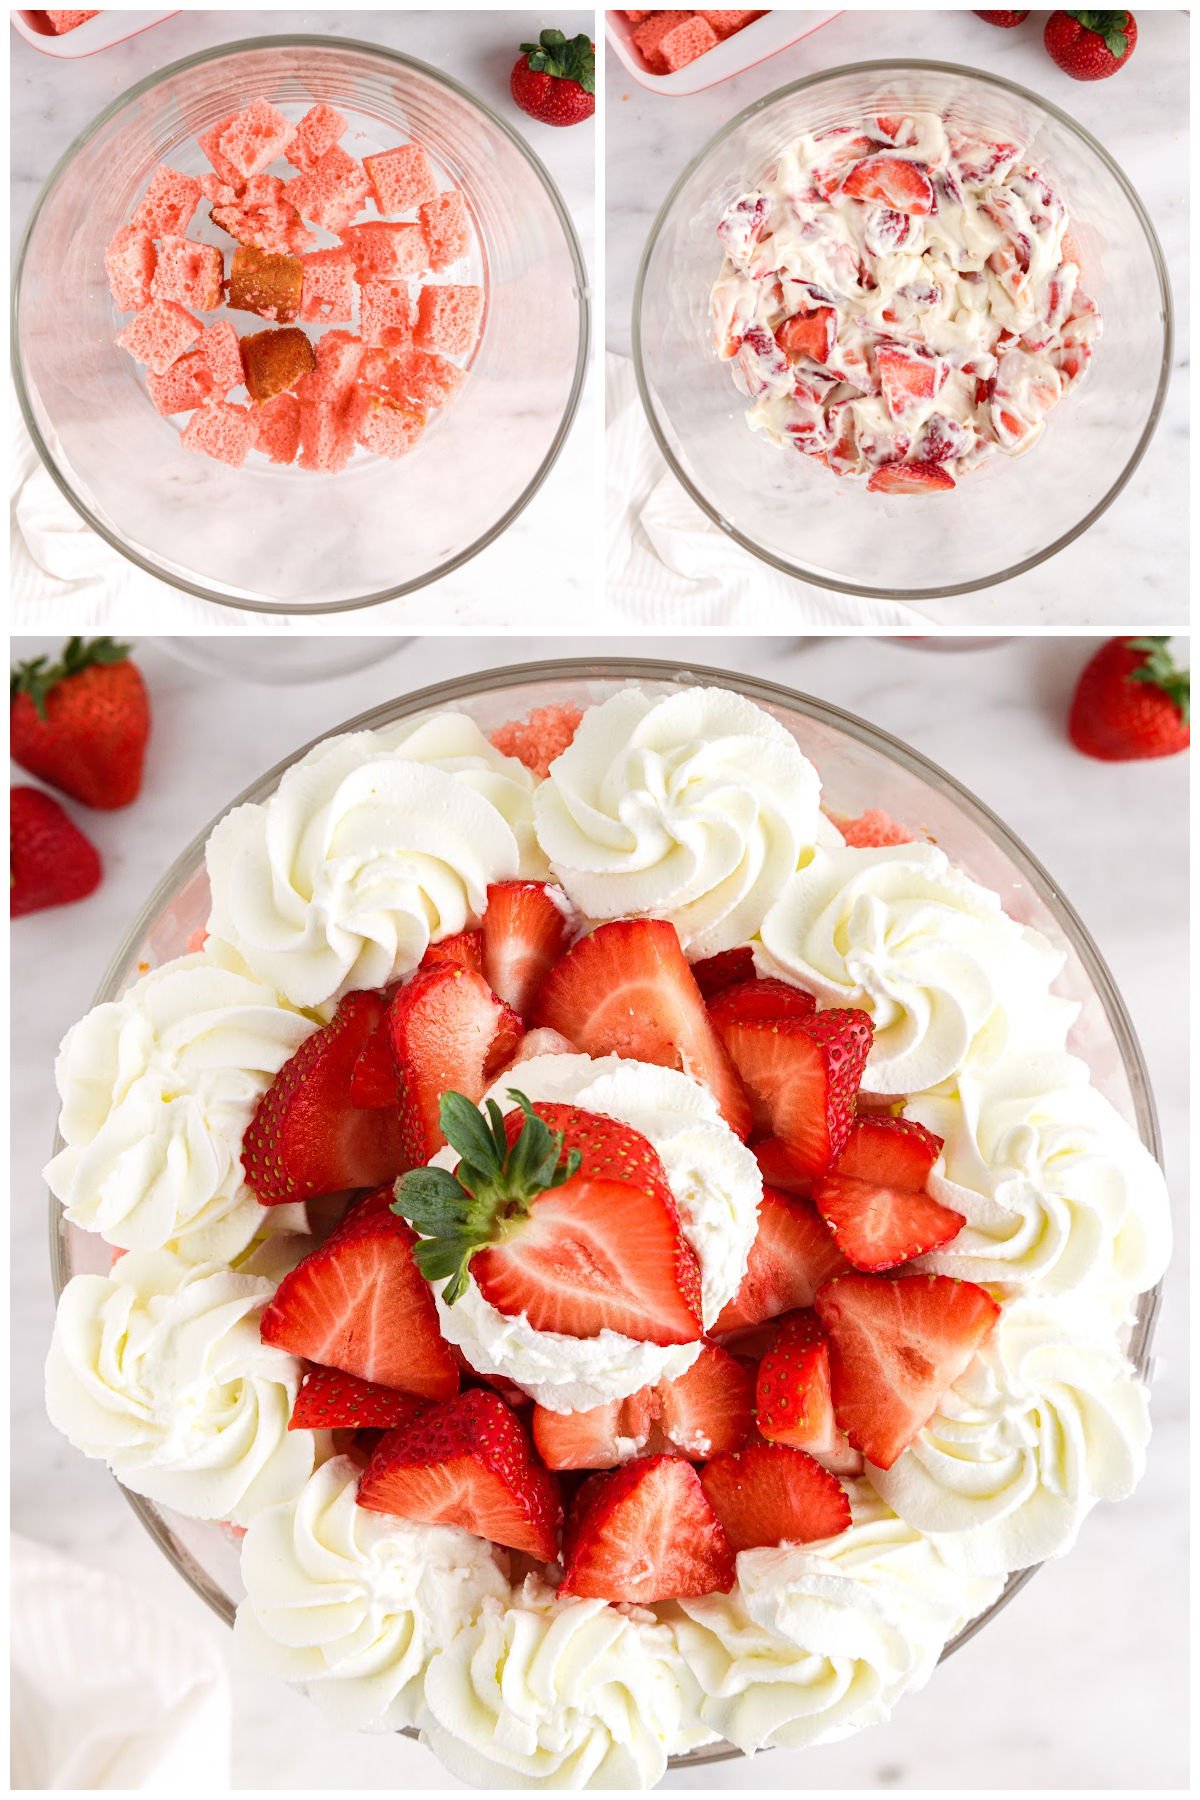 Photo collage layering strawberry cake pieces and pudding and whipped cream and topped with fresh strawberries.